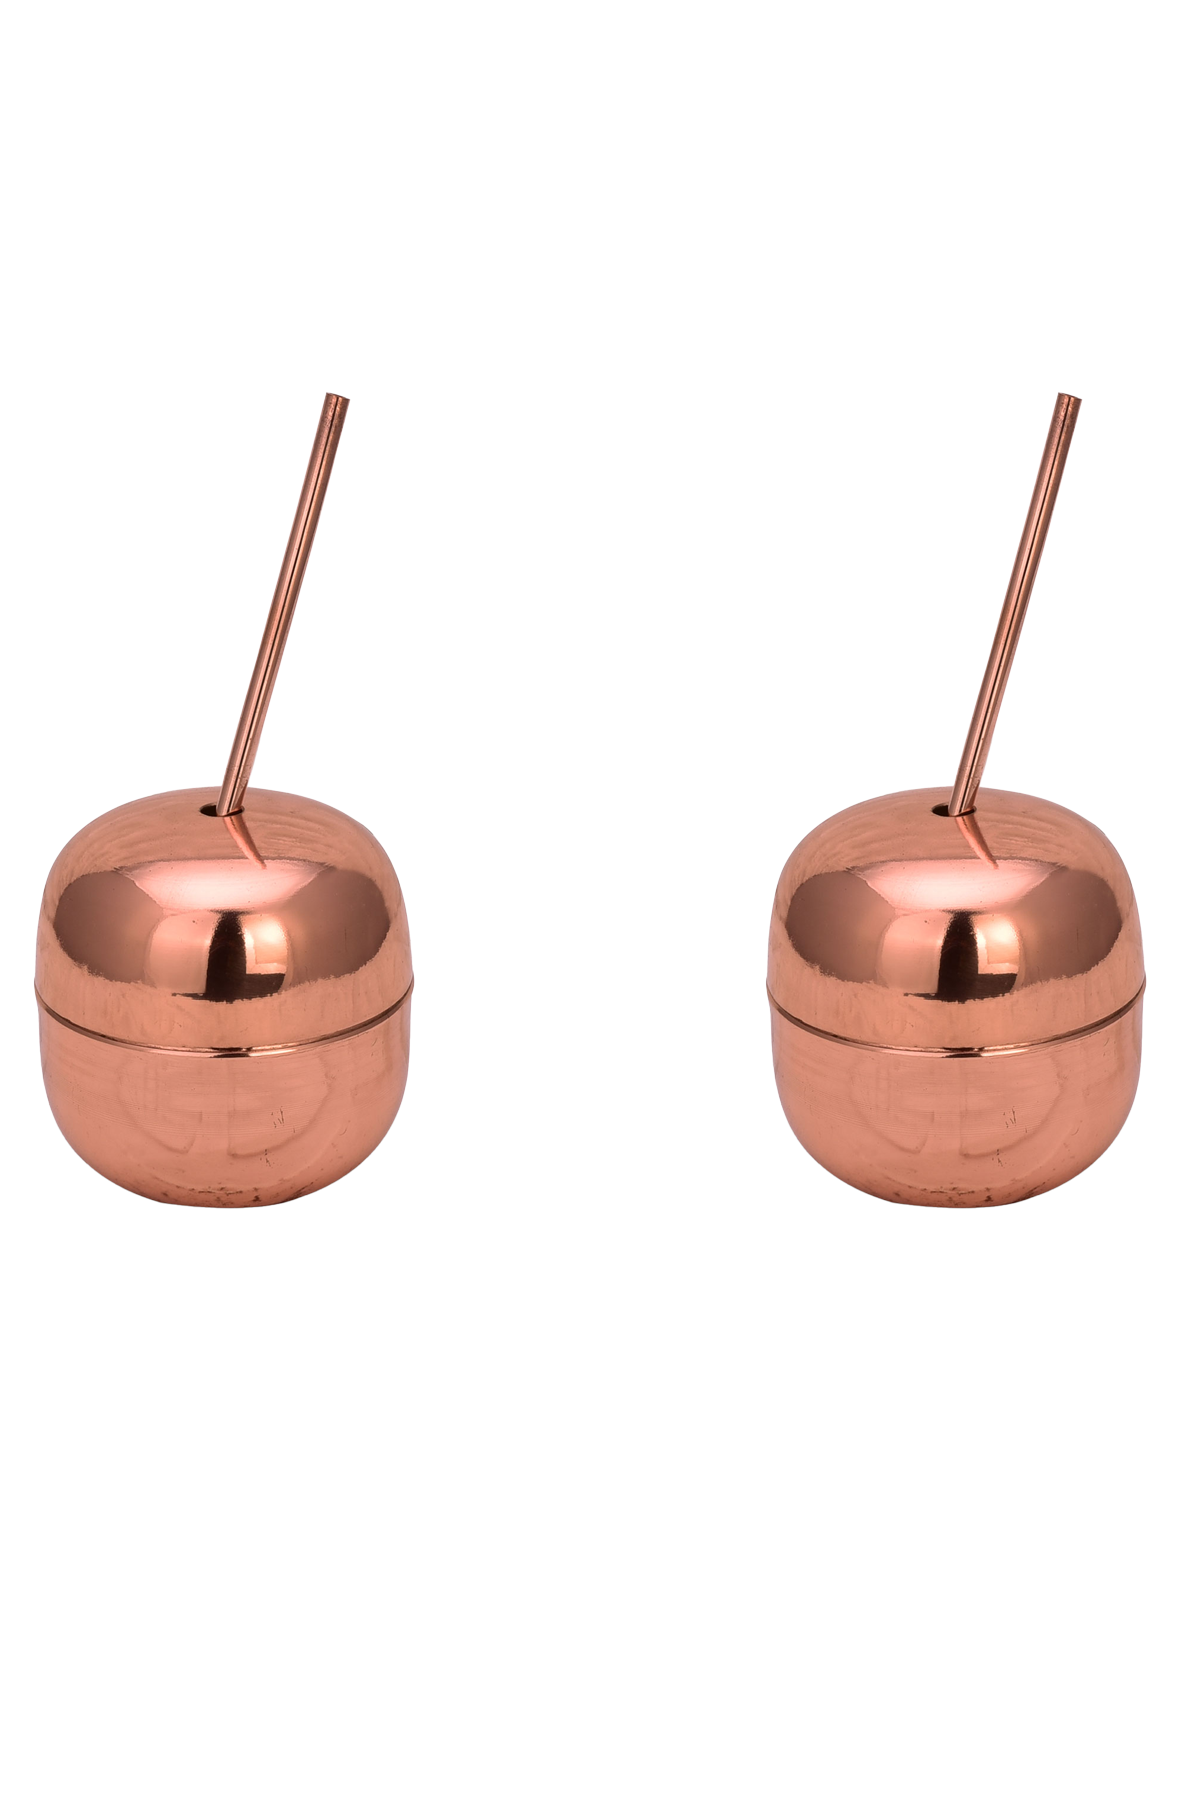 Copper Apple Cup with Straw 250 Ml Set of 2